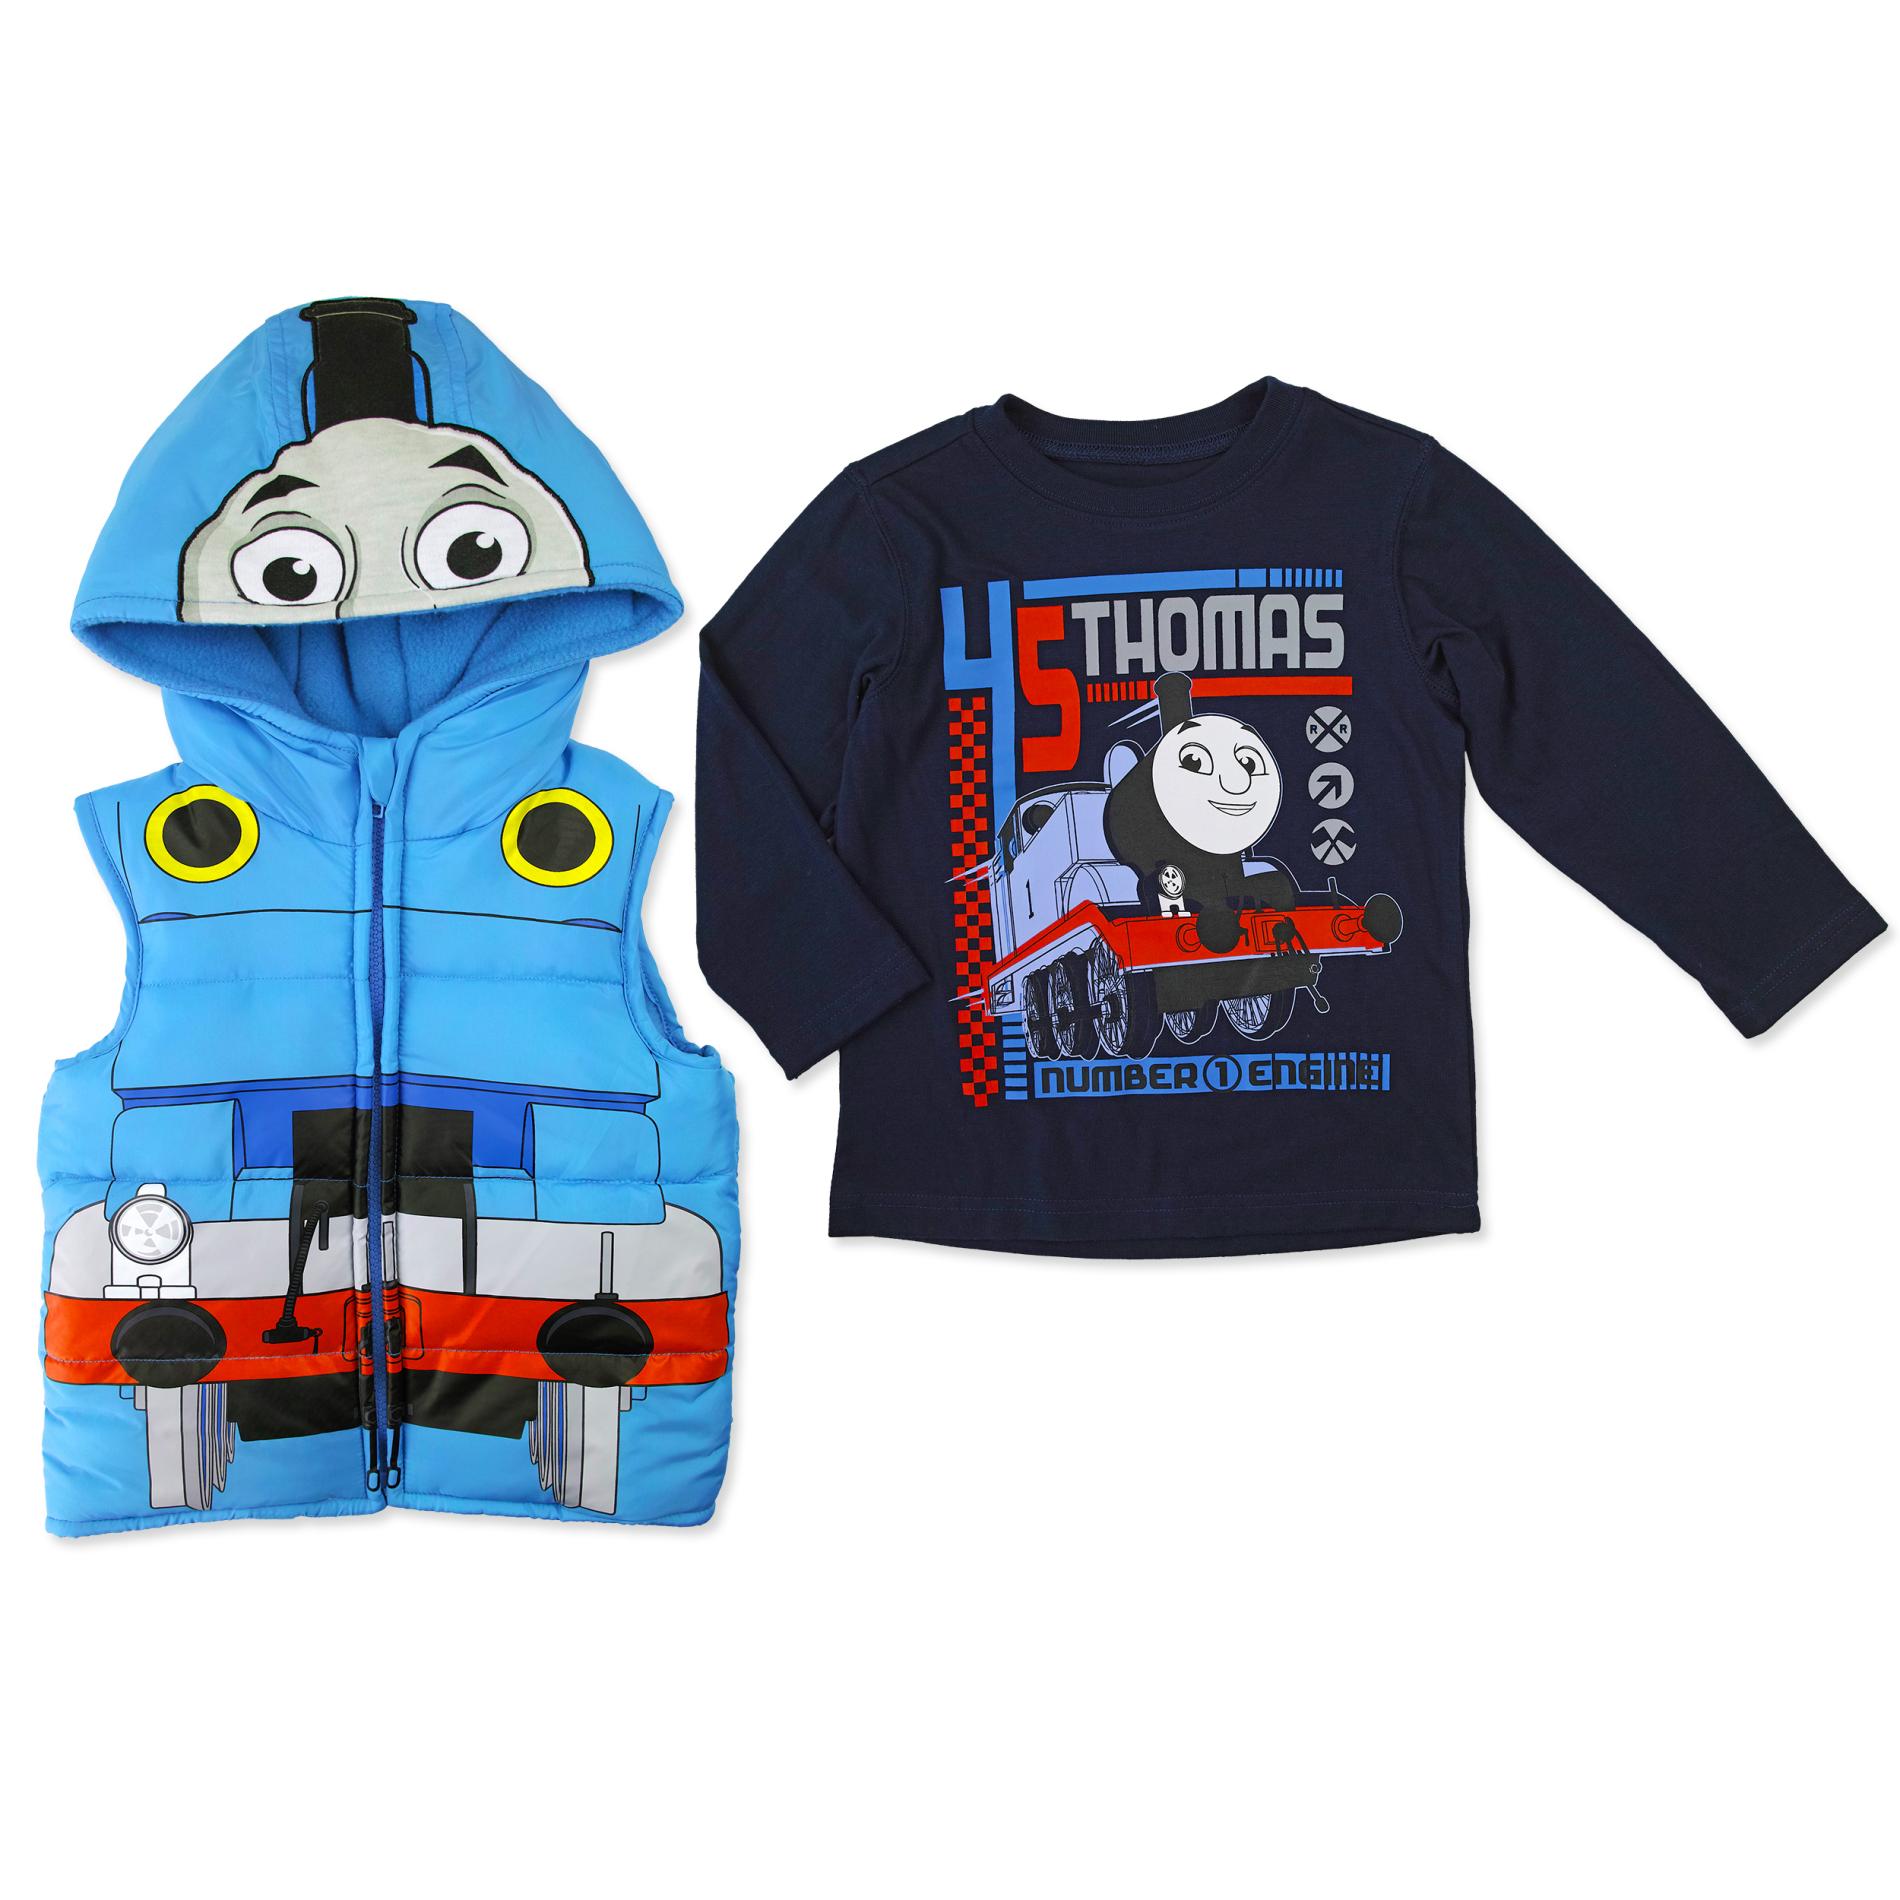 Thomas & Friends Infant & Toddler Boys' Hooded Vest & Graphic T-Shirt